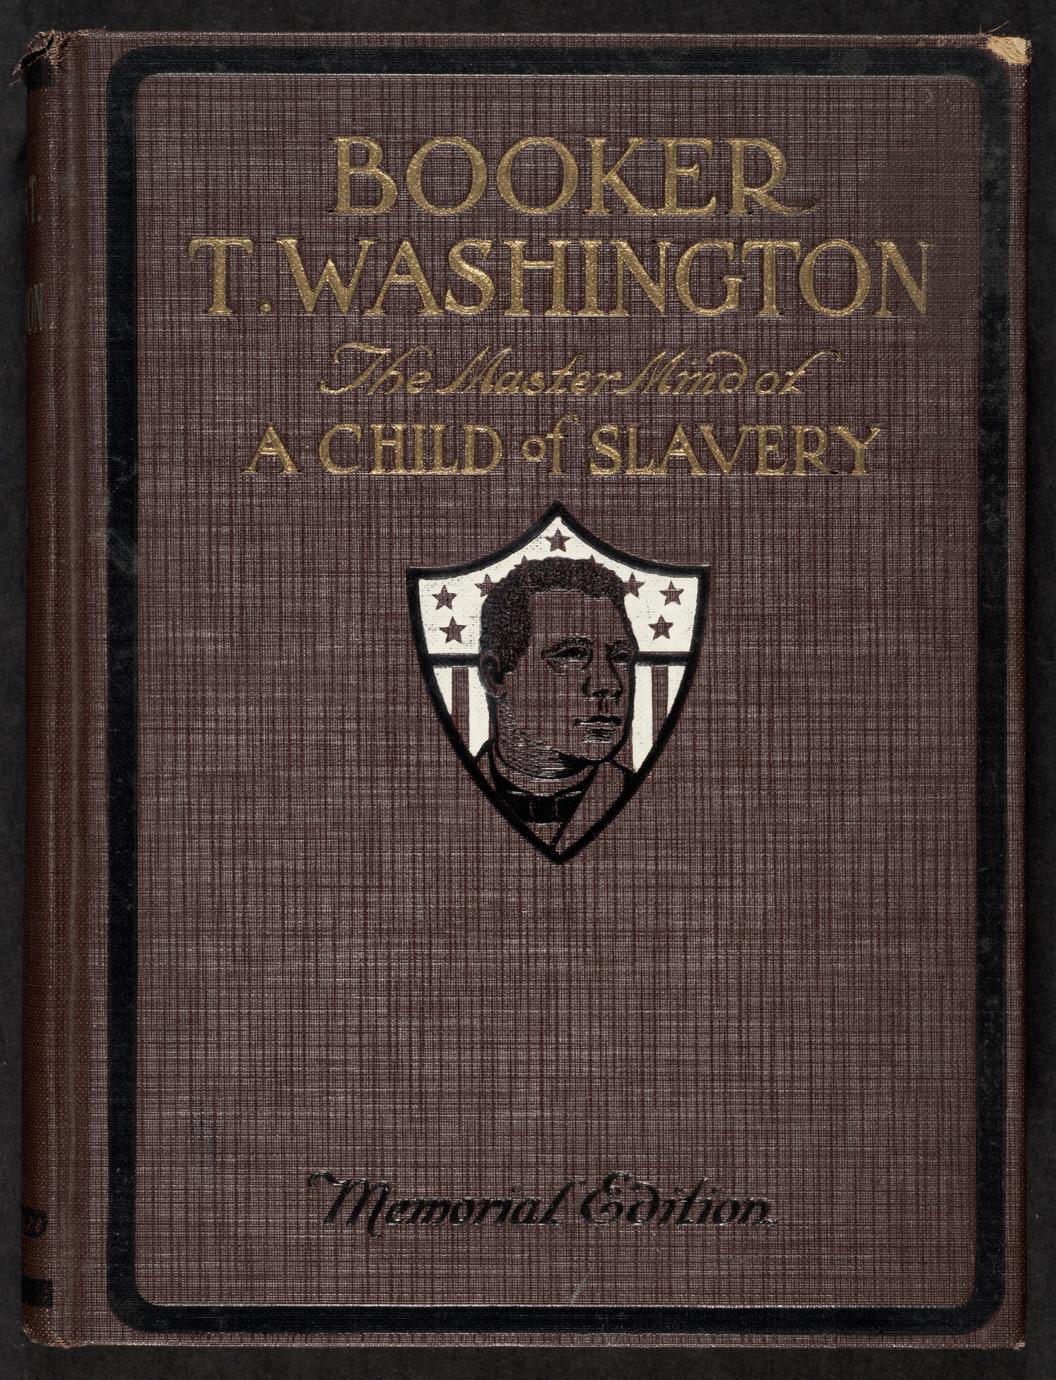 Booker T. Washington, the master mind of a child of slavery : an appealing life story rivaling in its picturesque simplicity and power those recounted about the lives of Washington and Lincoln (1 of 2)